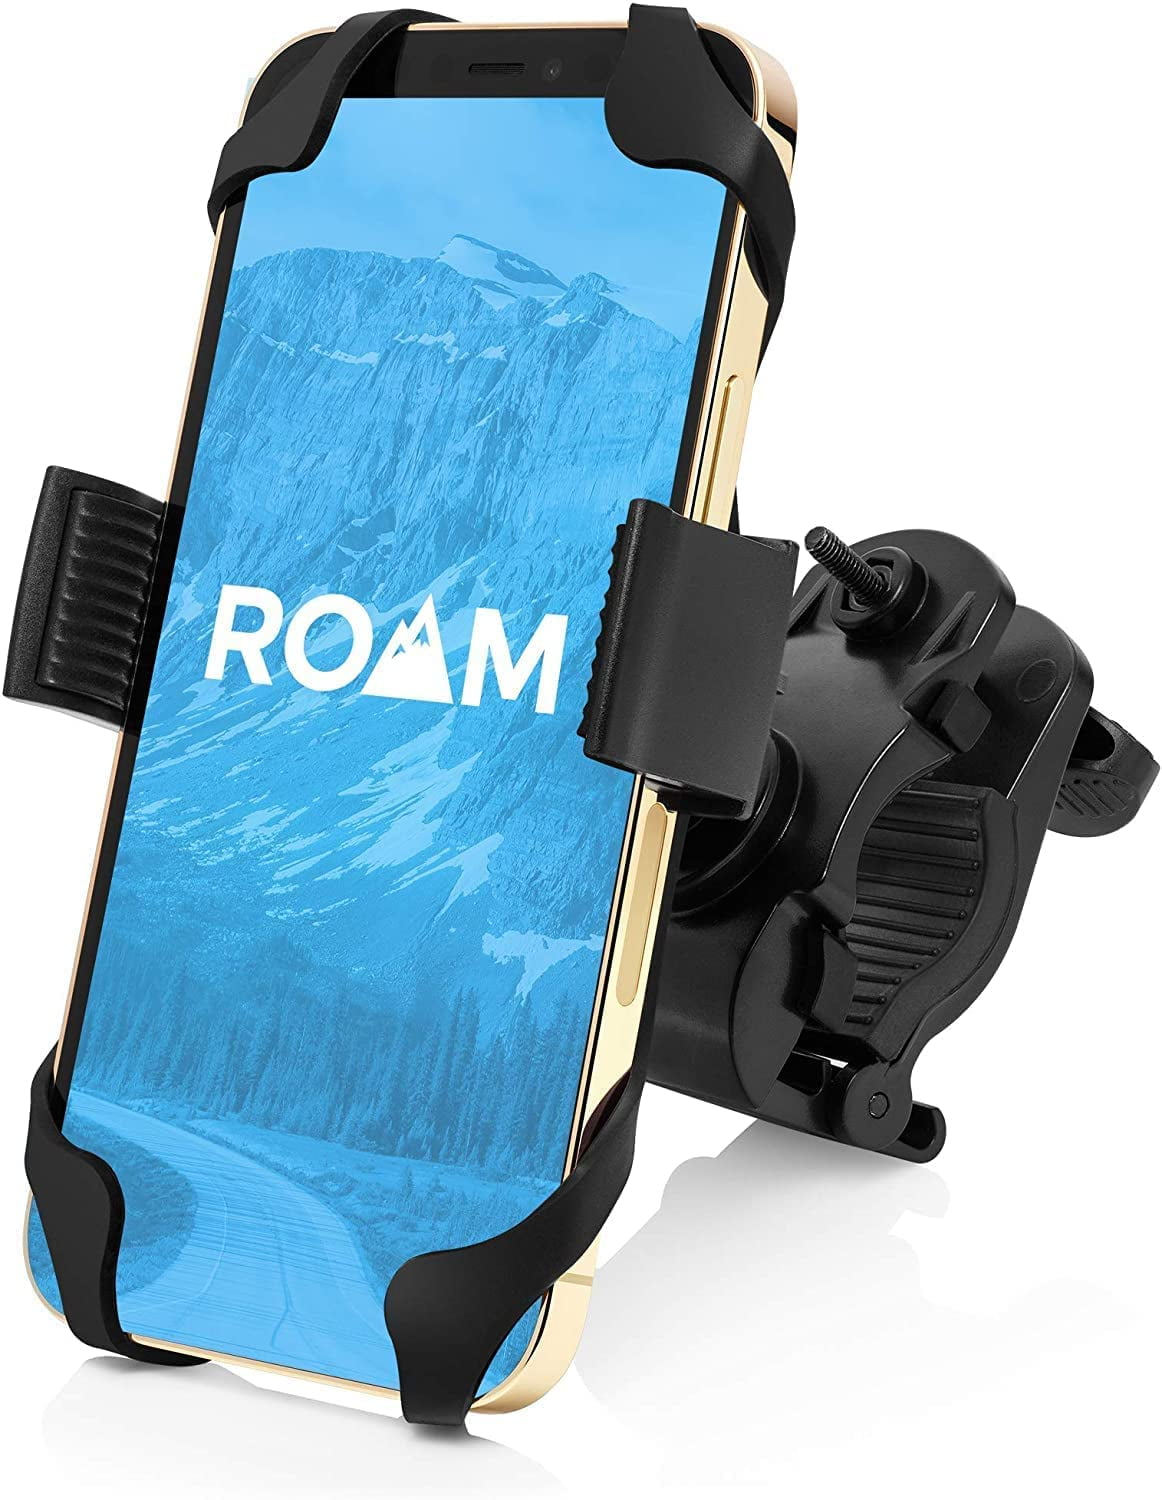 Bike Phone Mount，Motorcycle Phone Mount,360 Rotation Universal Cell Phone Holder，The Most Secure & Reliable Bicycle Phone Holder for iPhone 13/12/11 Pro/11/Max/XS/XR/X/8 Samsung Galaxy 